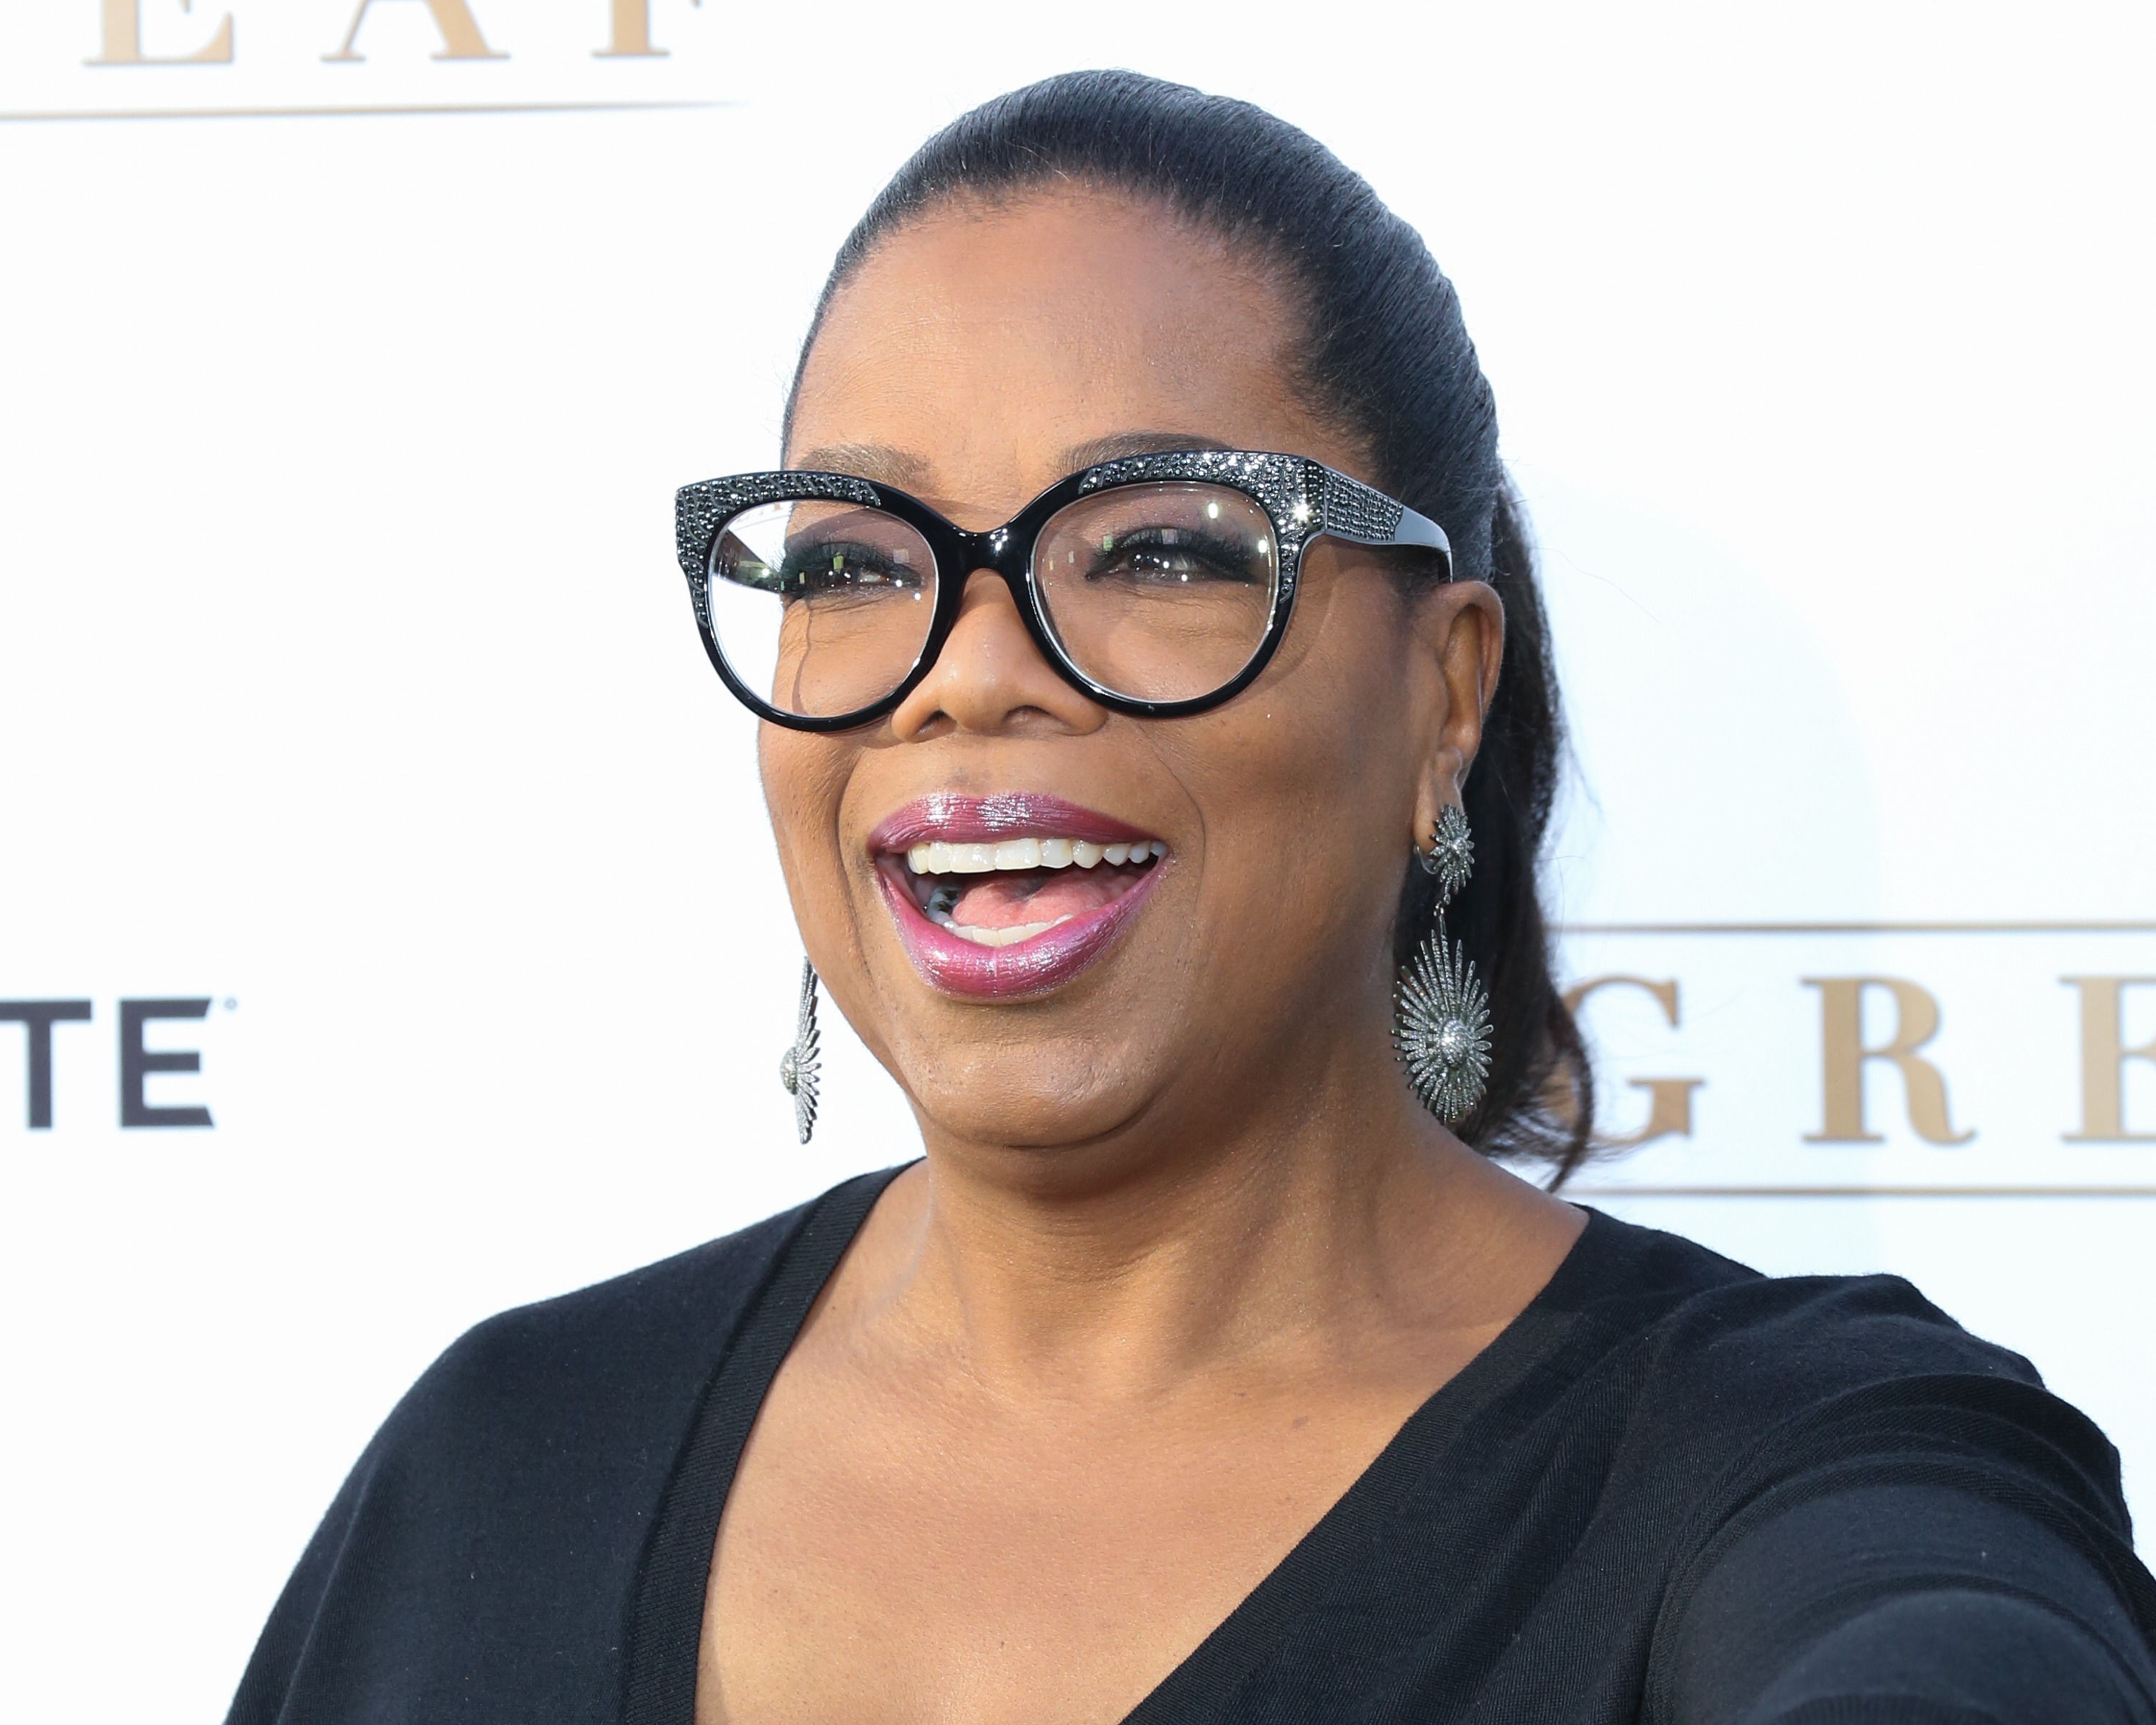 Producer / TV Personality Oprah Winfrey attends the premiere of OWN's "Greenleaf" at The Lot on June 15, 2016 in West Hollywood, California. (Paul Archuleta&mdash;FilmMagic/Getty Images)